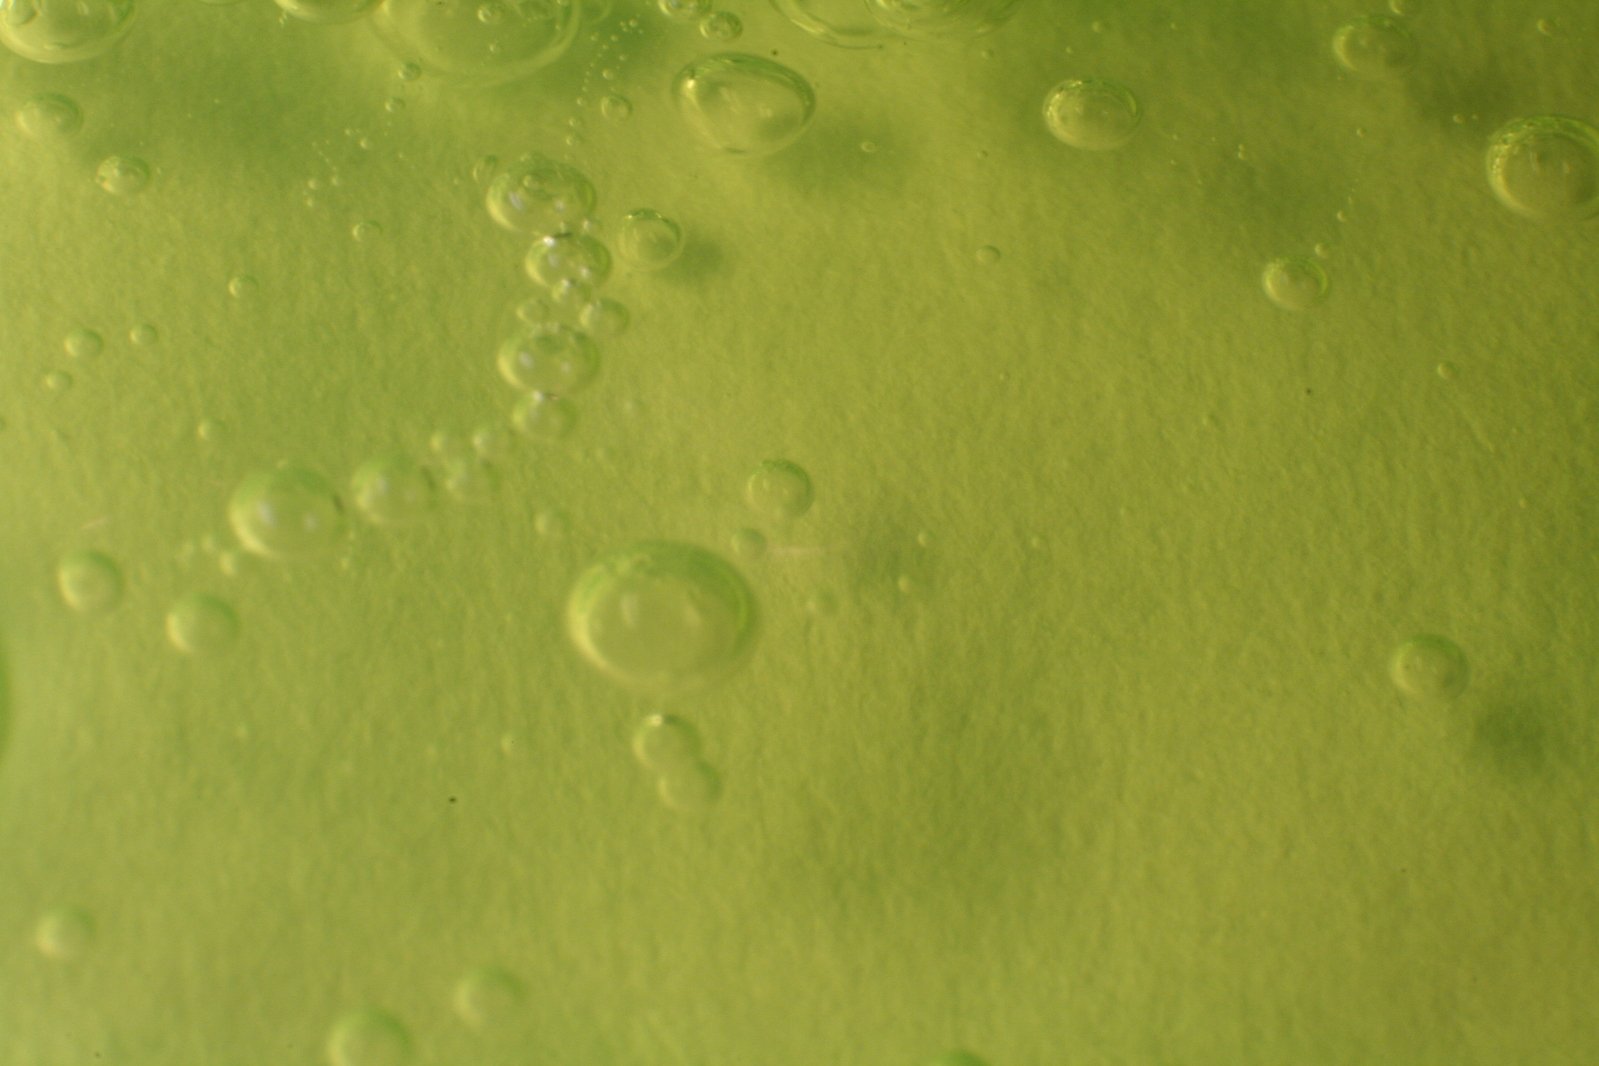 water droplets on a green surface, with some green in background